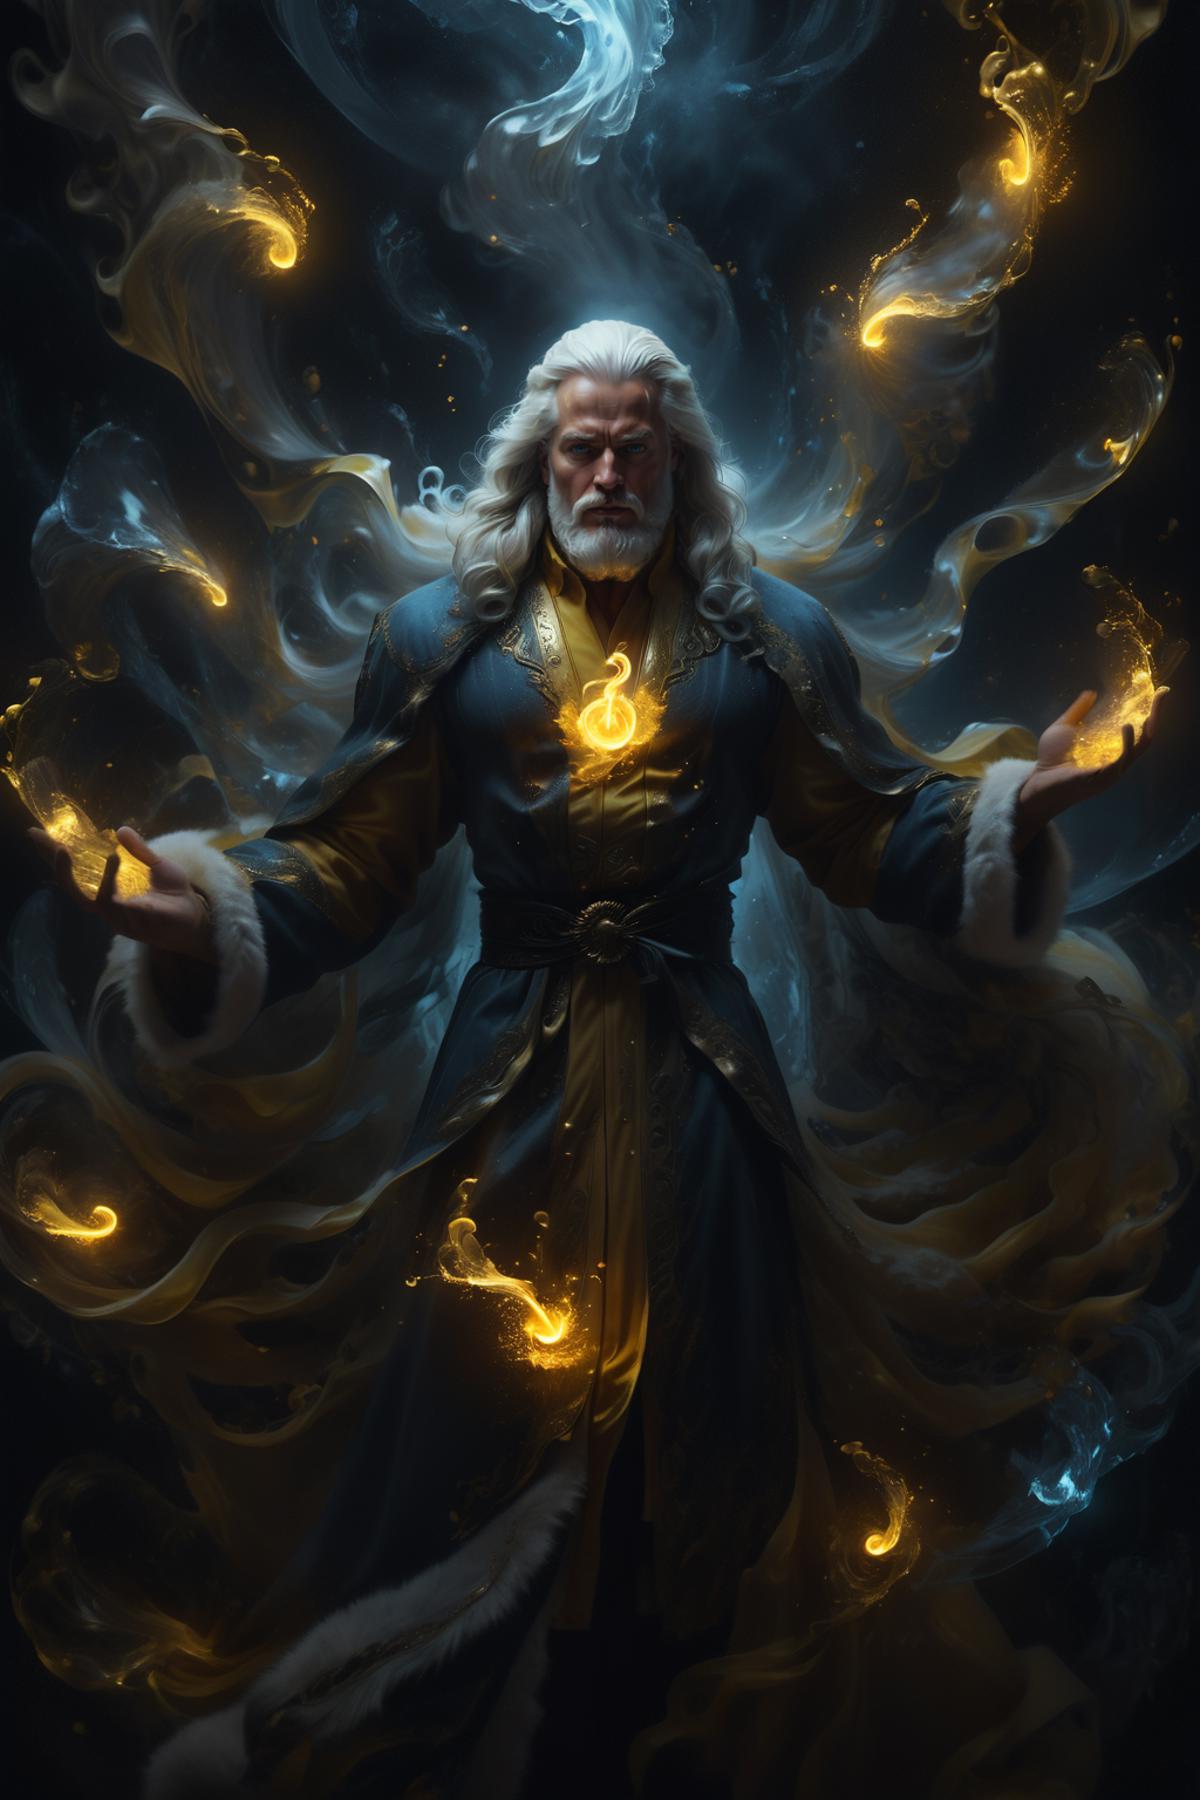 A majestic portrait of a bearded man in a yellow robe with a flame in his chest, surrounded by swirling smoke and gold.